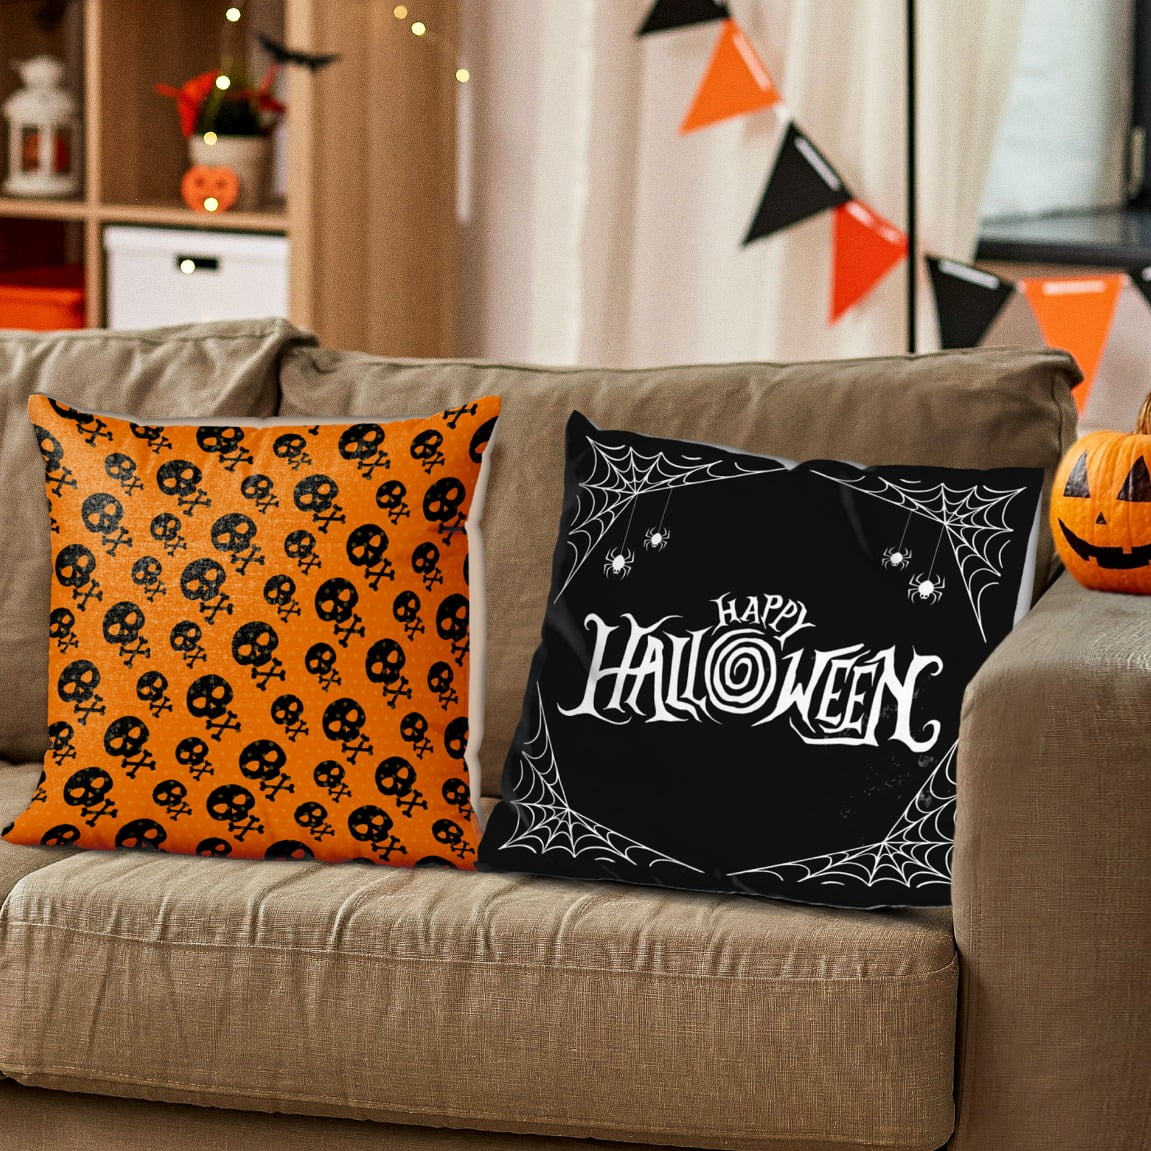 Happy Halloween Horror Pumpkin Pattern Pillows, 18x18inch, Square Decorative Pillow Cushion Cover Case with Zipper for Sofa Home Decoration